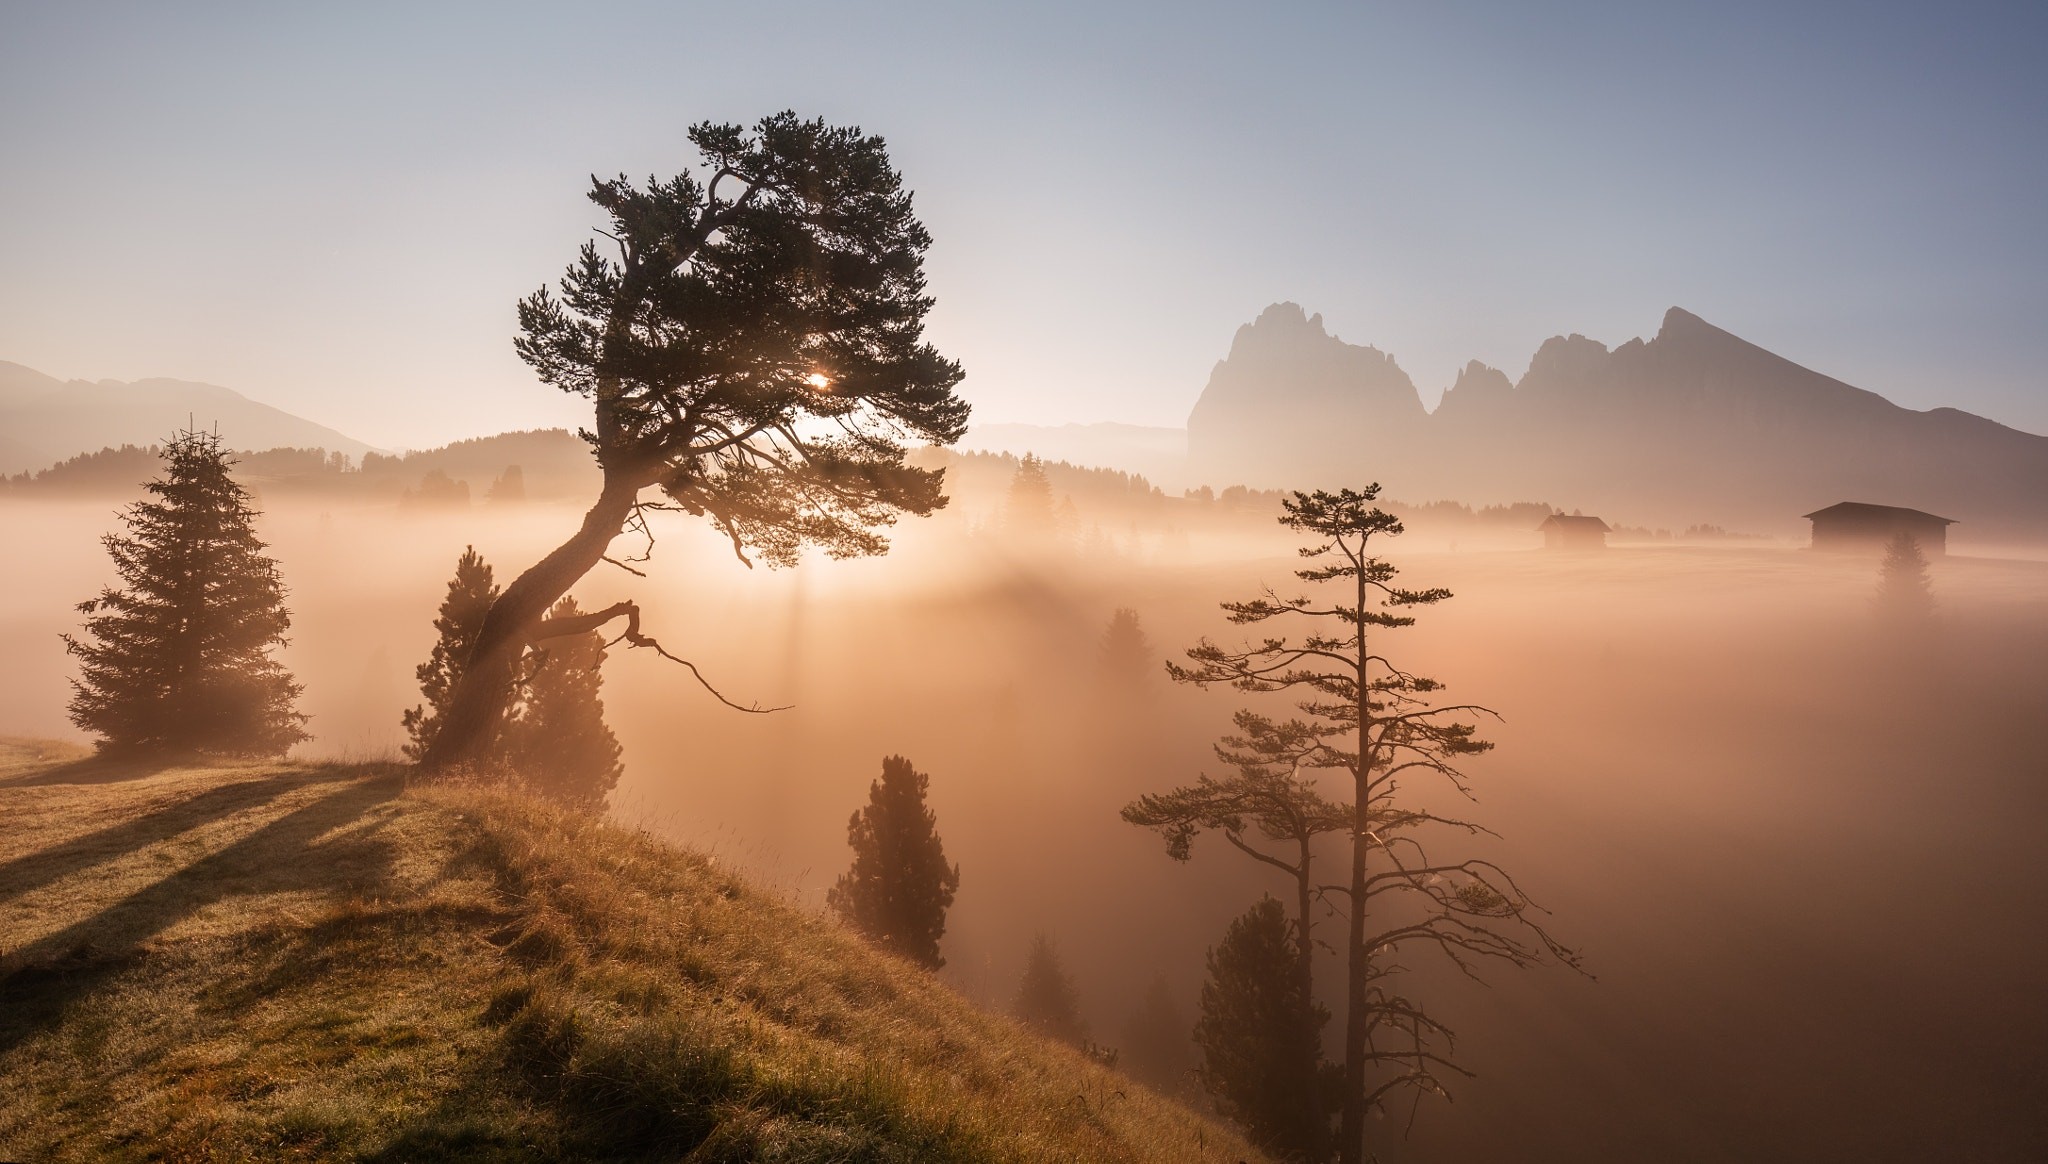 General 2048x1164 nature mountains trees landscape photography mist